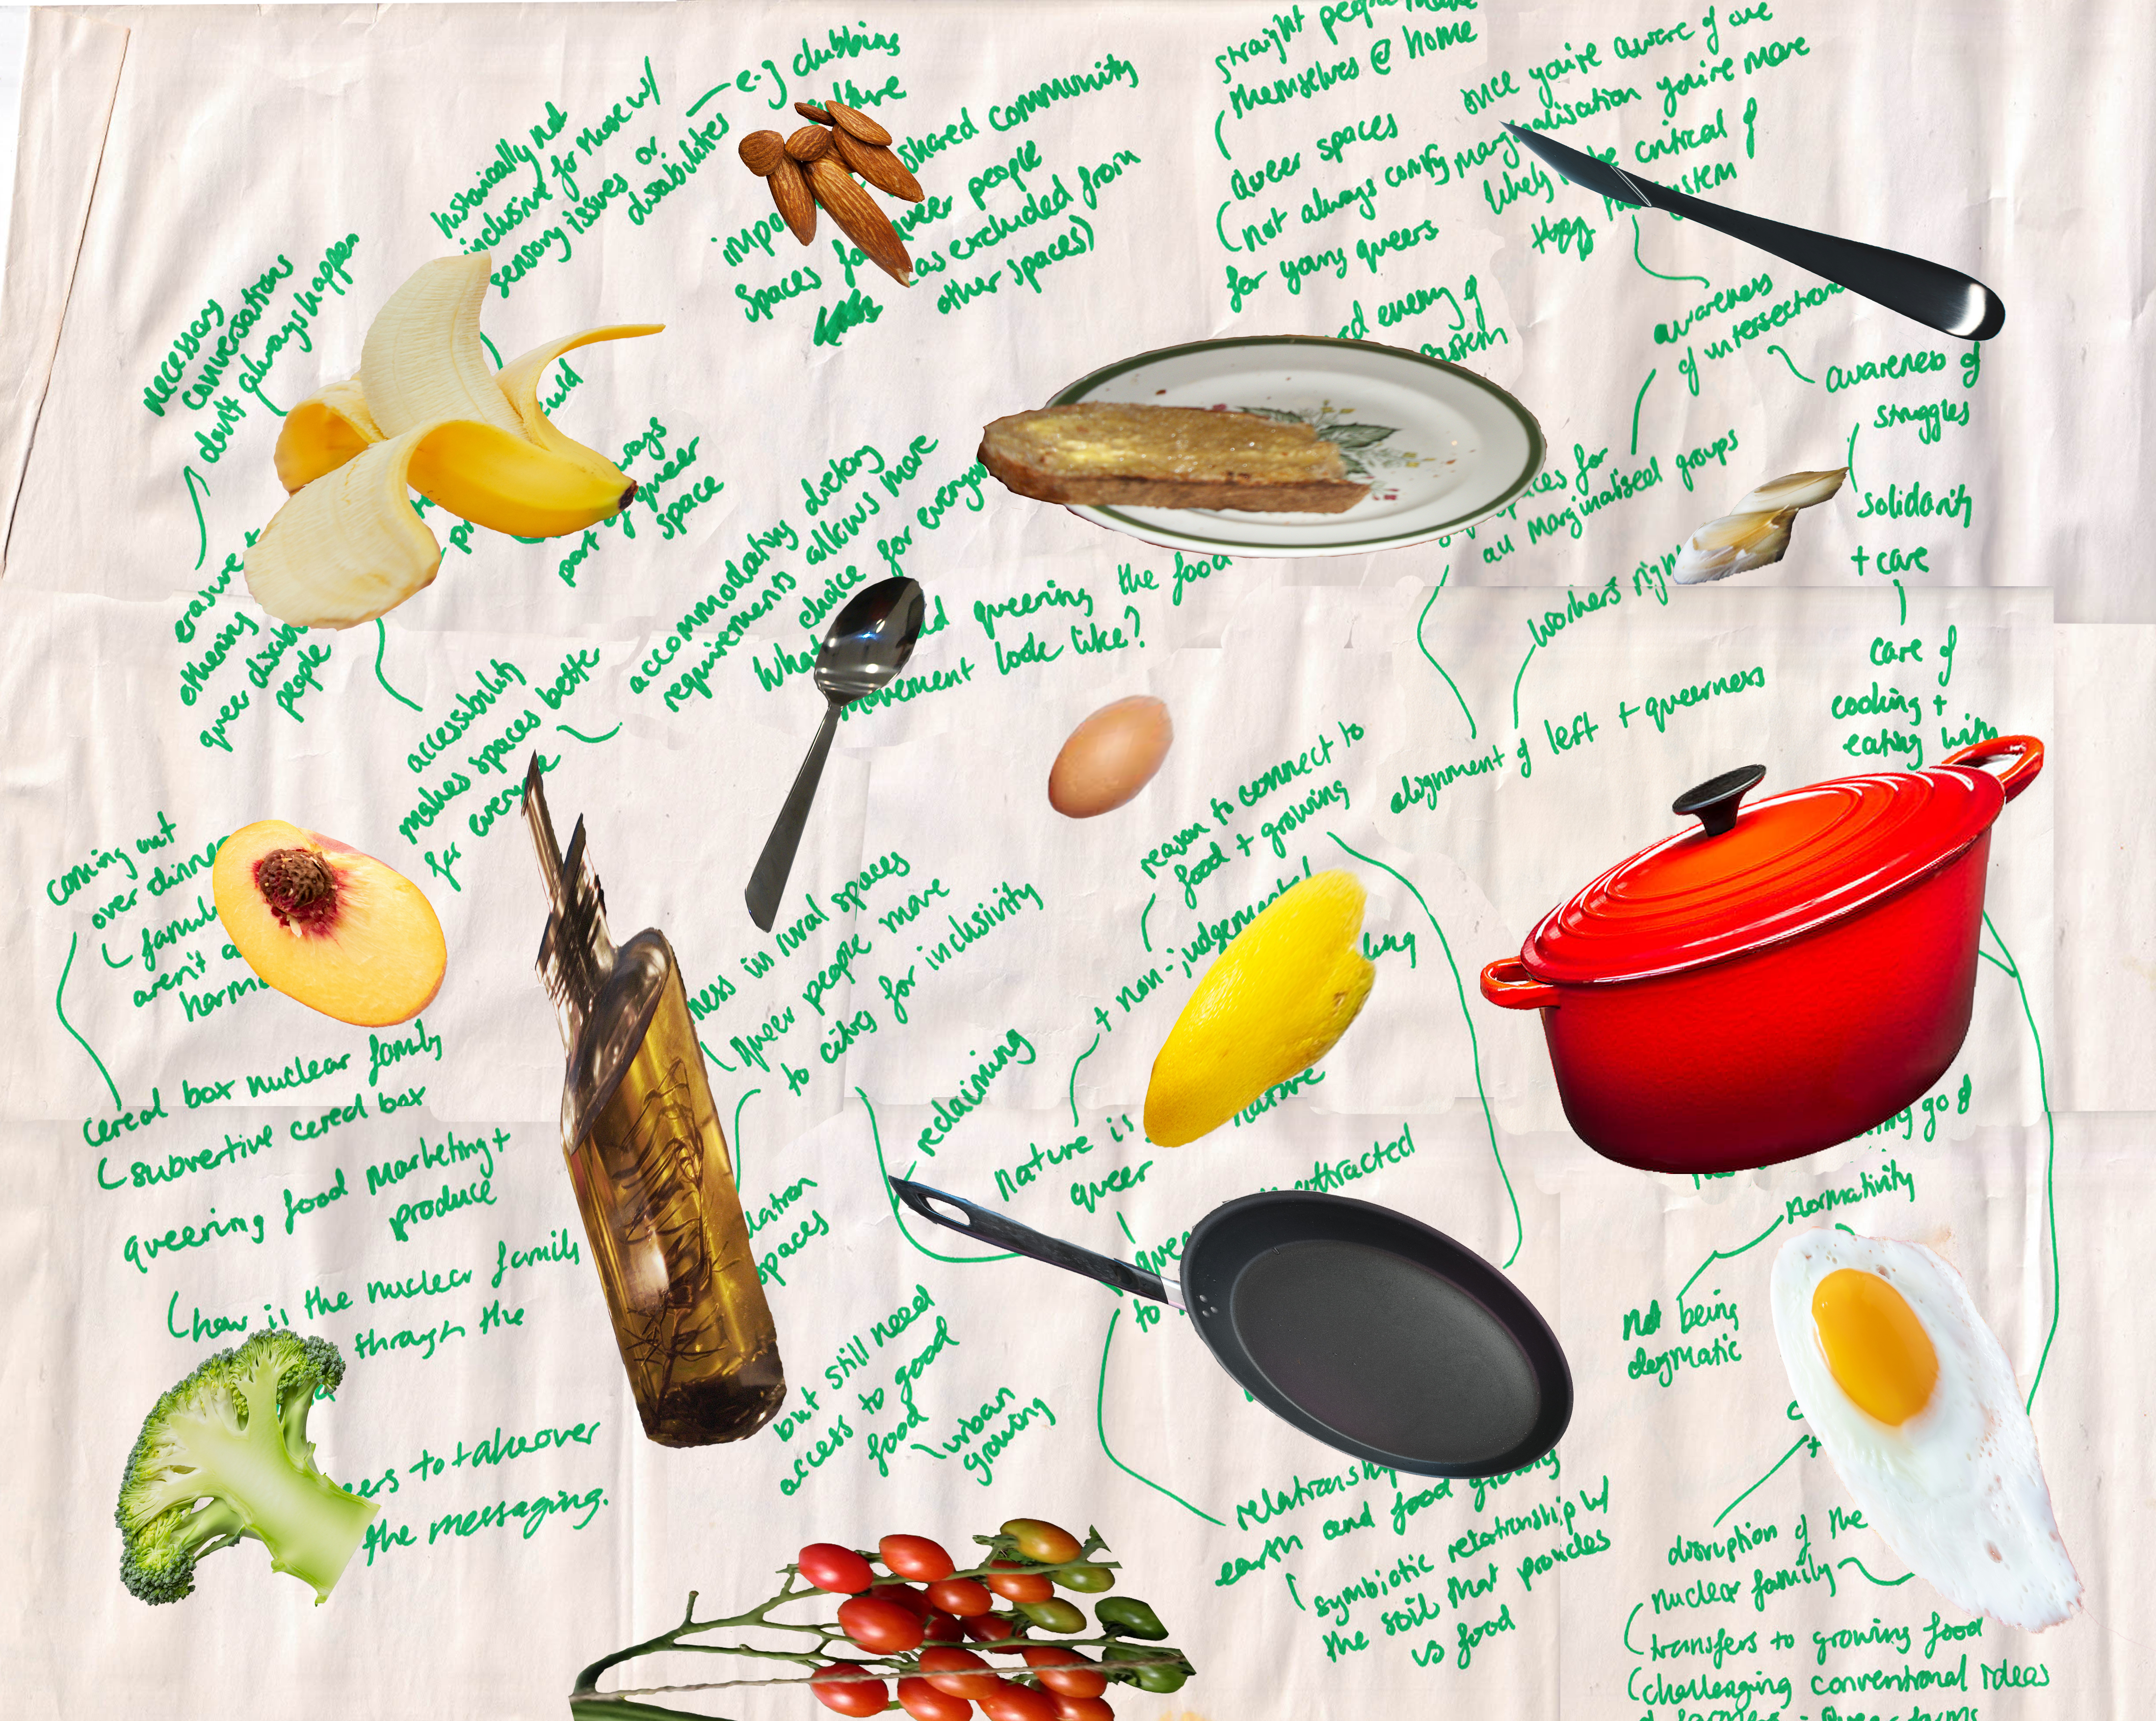 Collage of photos of different food items over a background of green text on a cream background mapping our relationship to food